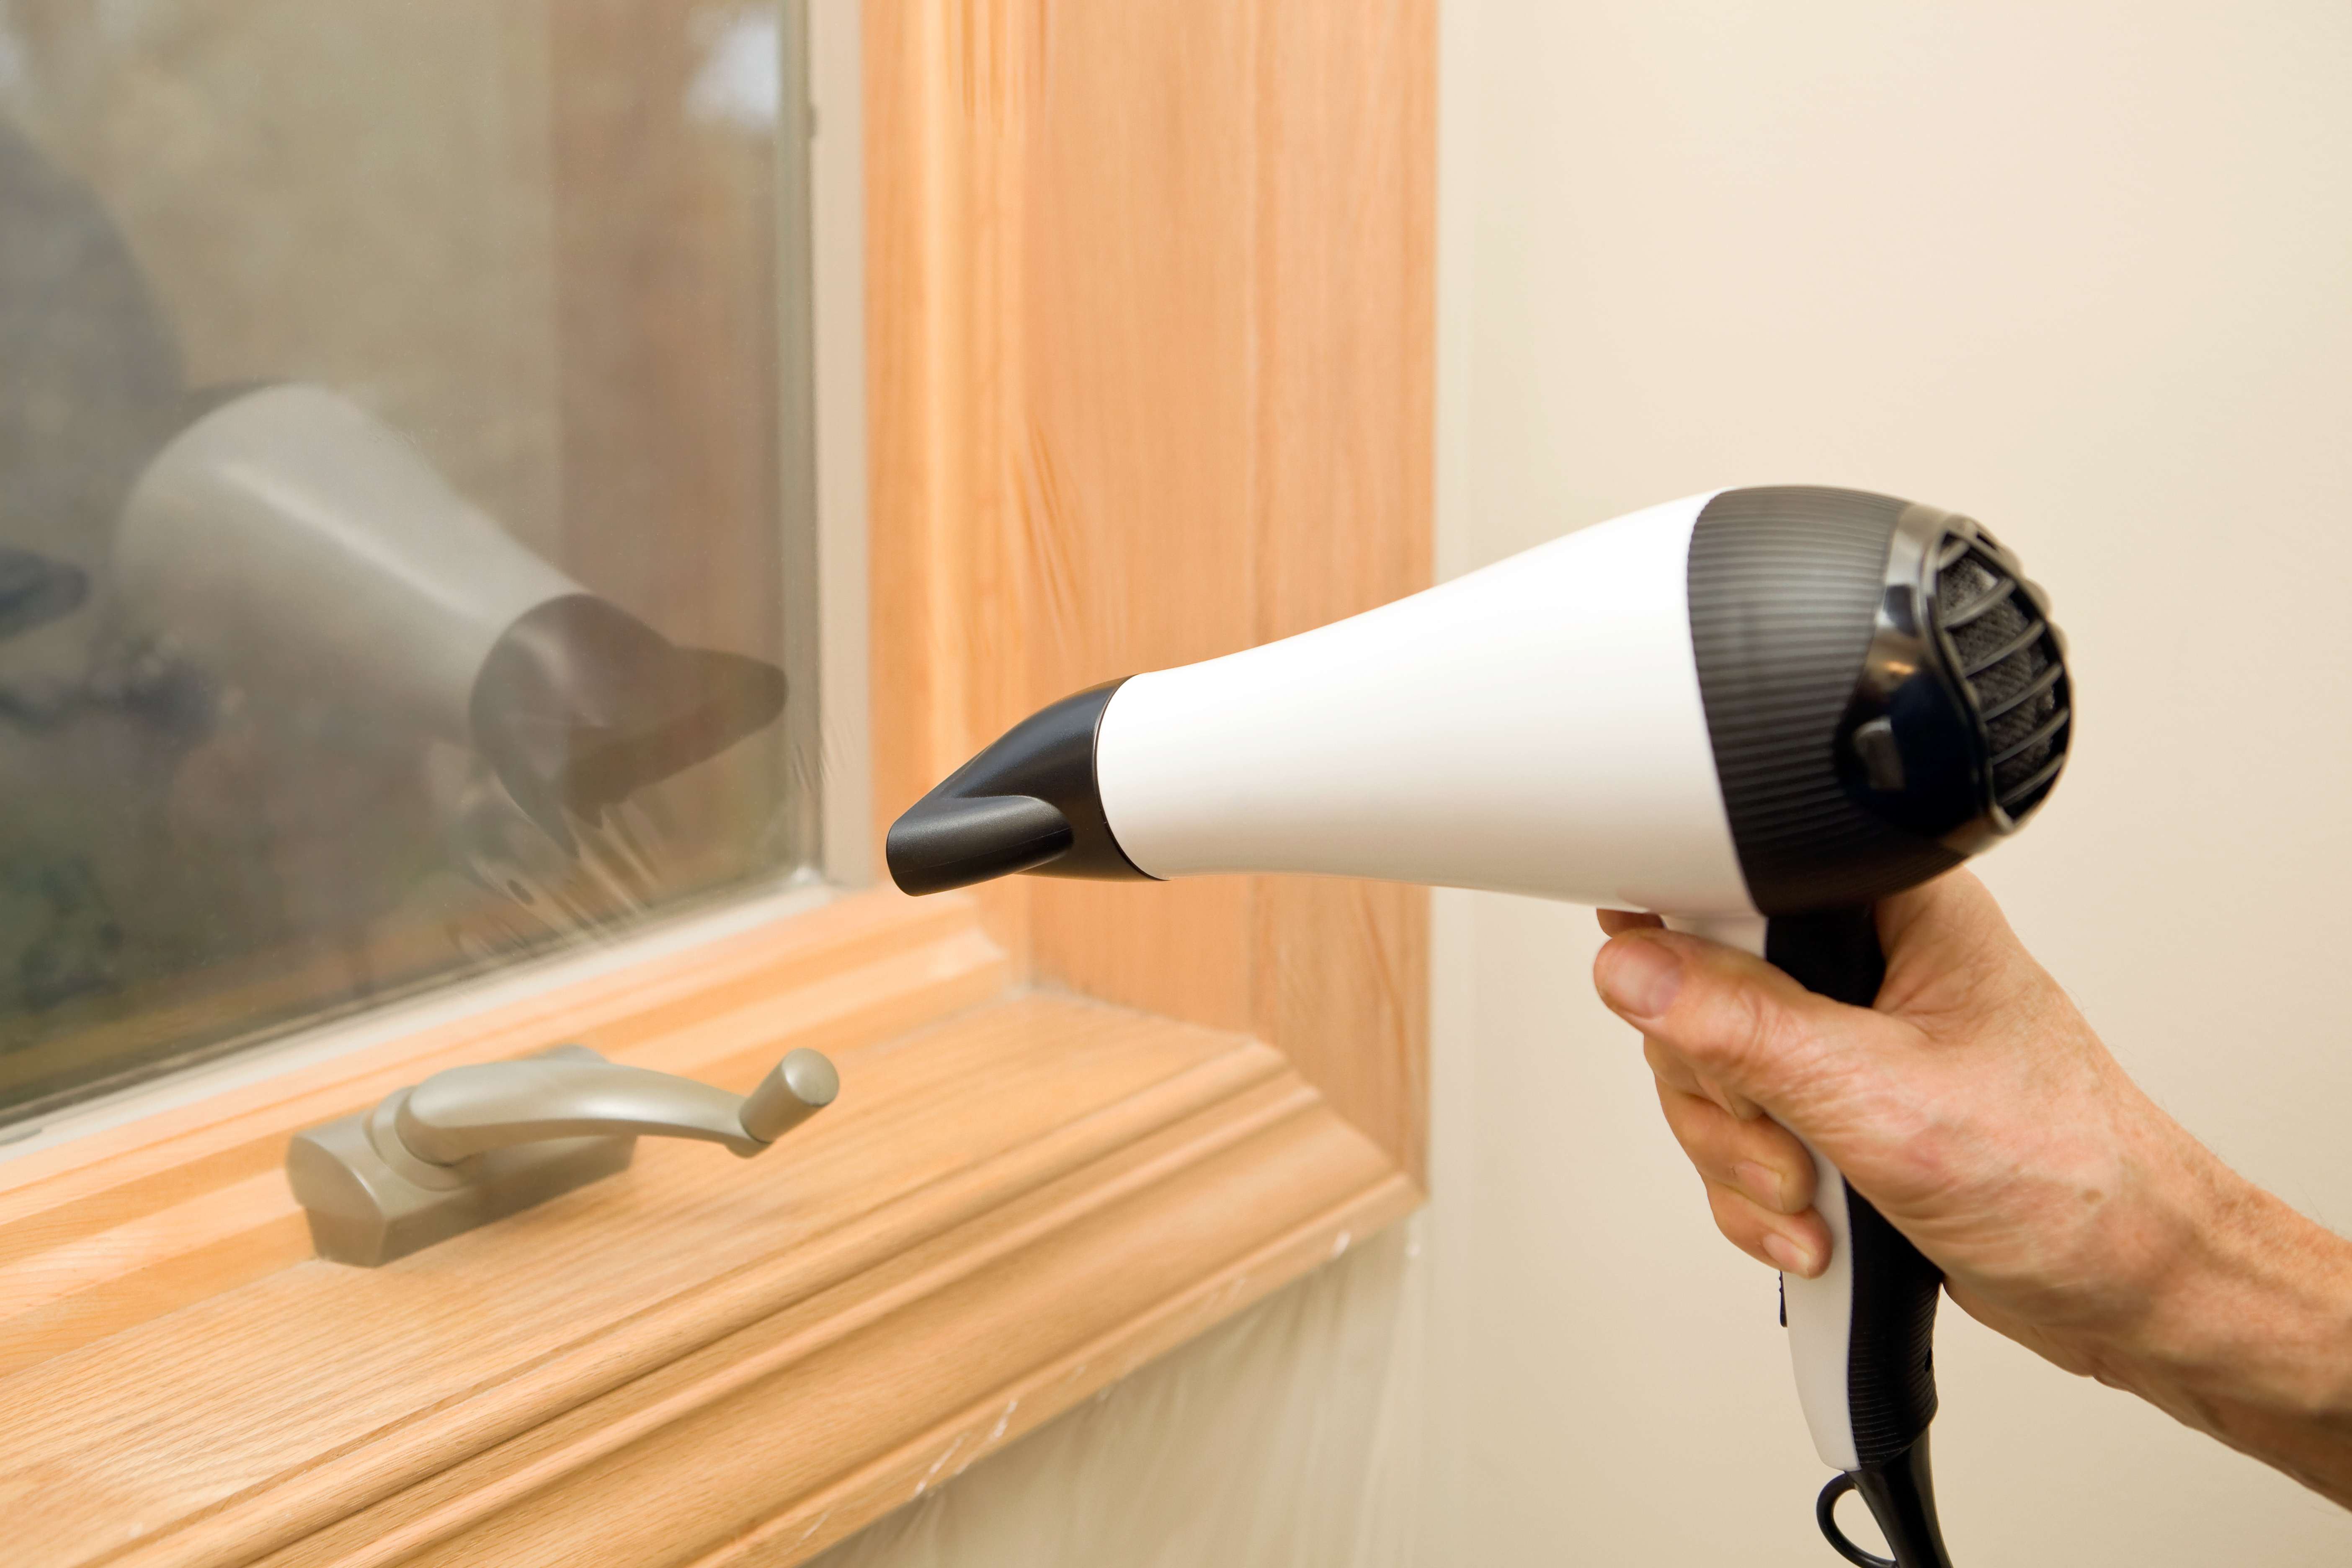 How To Seal A Window How to Seal Windows with Plastic